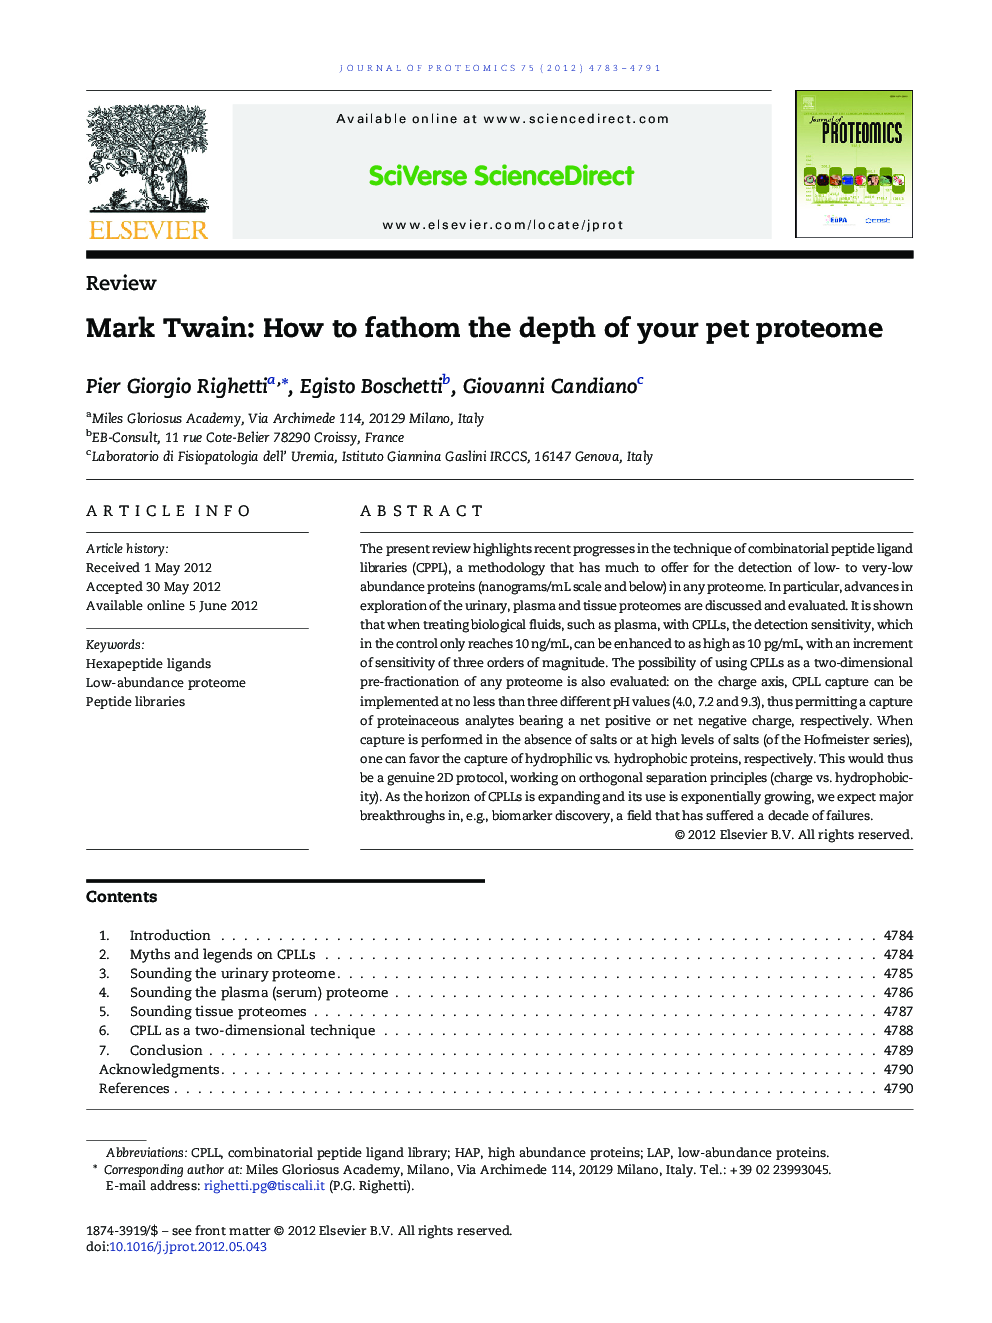 Mark Twain: How to fathom the depth of your pet proteome